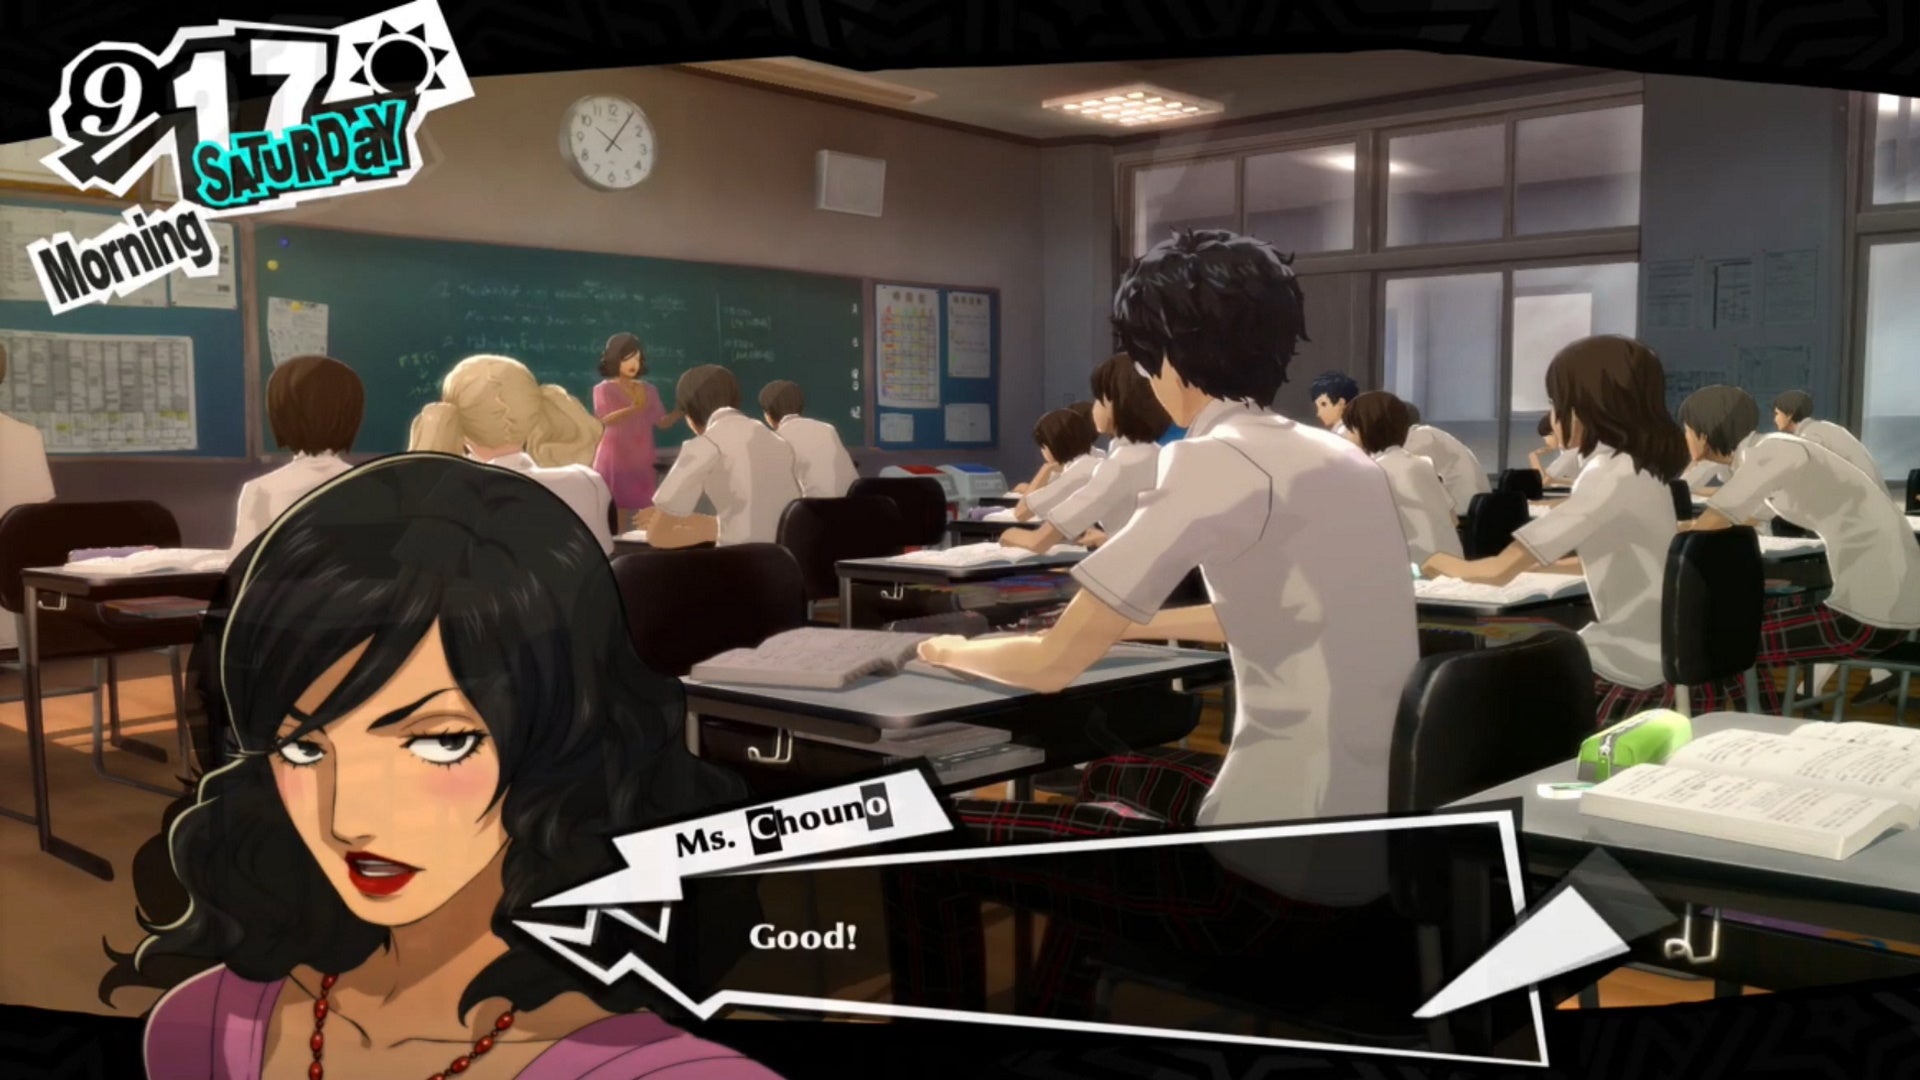 Persona 5 Royal classroom answers September: An anime woman praises a student in her classroom